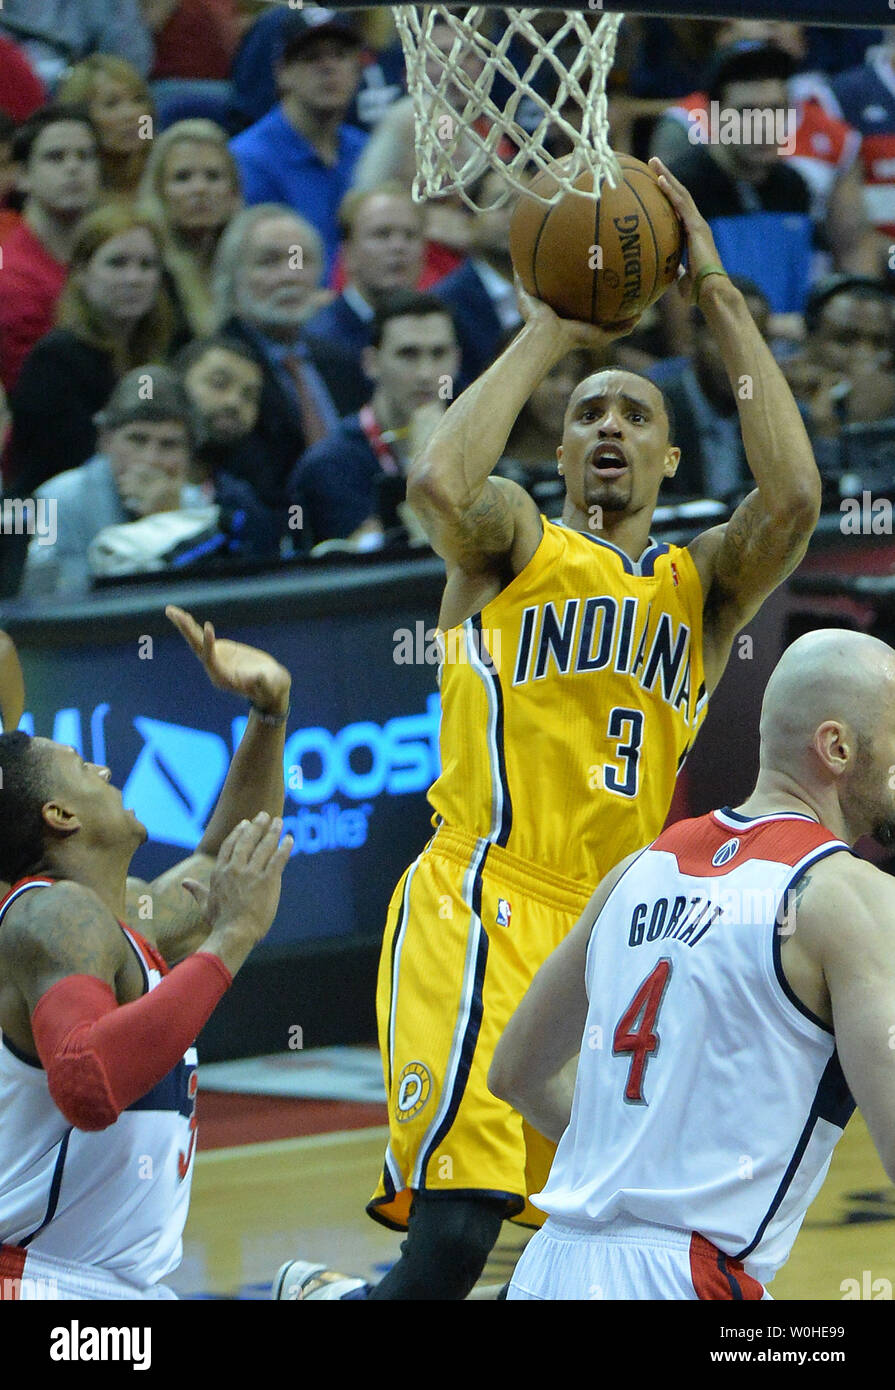 Indiana Pacers guard George Hill (3) shoots for three against the Washington Wizards during the 1st half of game six of the Eastern Conference Semifinals at the Verizon Center in Washington, D.C. on May 15, 2014. UPI/Kevin Dietsch Stock Photo